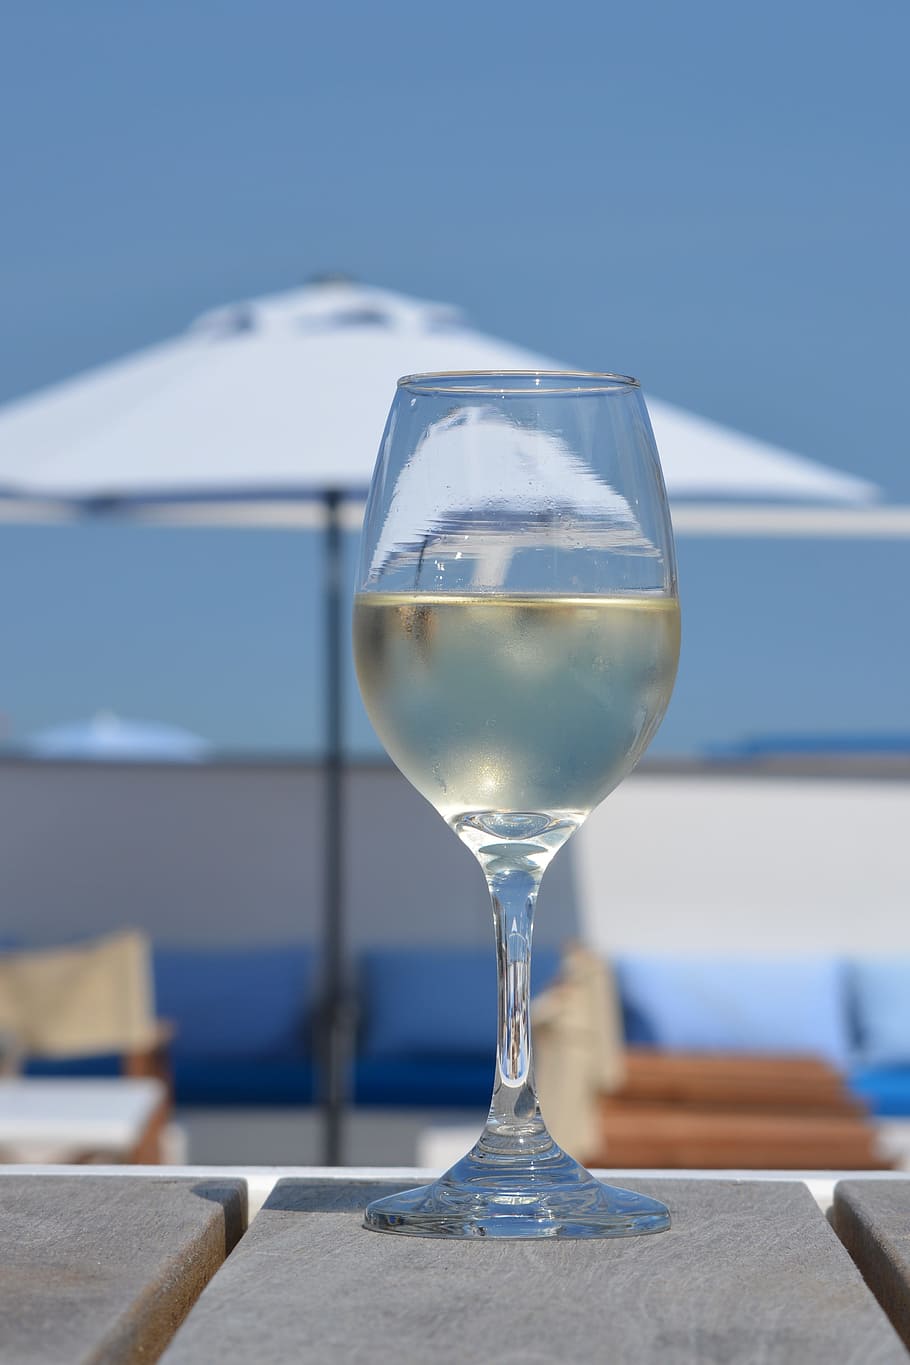 Wine, Glass, Holiday, Blue Sky, wine, glass, beach bar, food and drink, focus on foreground, drinking glass, drink